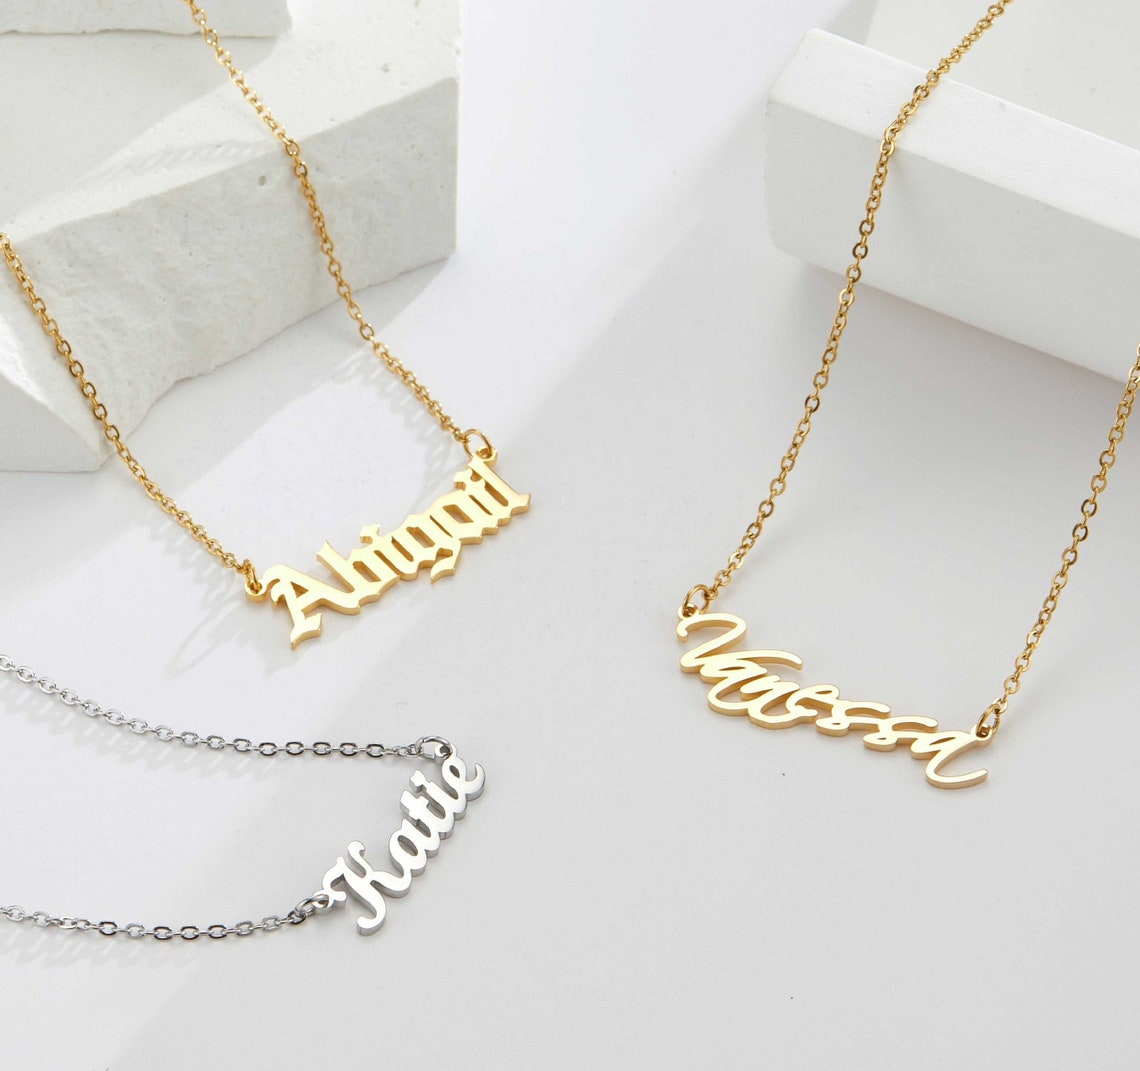 Personalised Name Necklace, Sterling Silver Necklace, Birthday Gifts for her, Personalized Engraved Jewelry, 18K Gold Plated Necklace